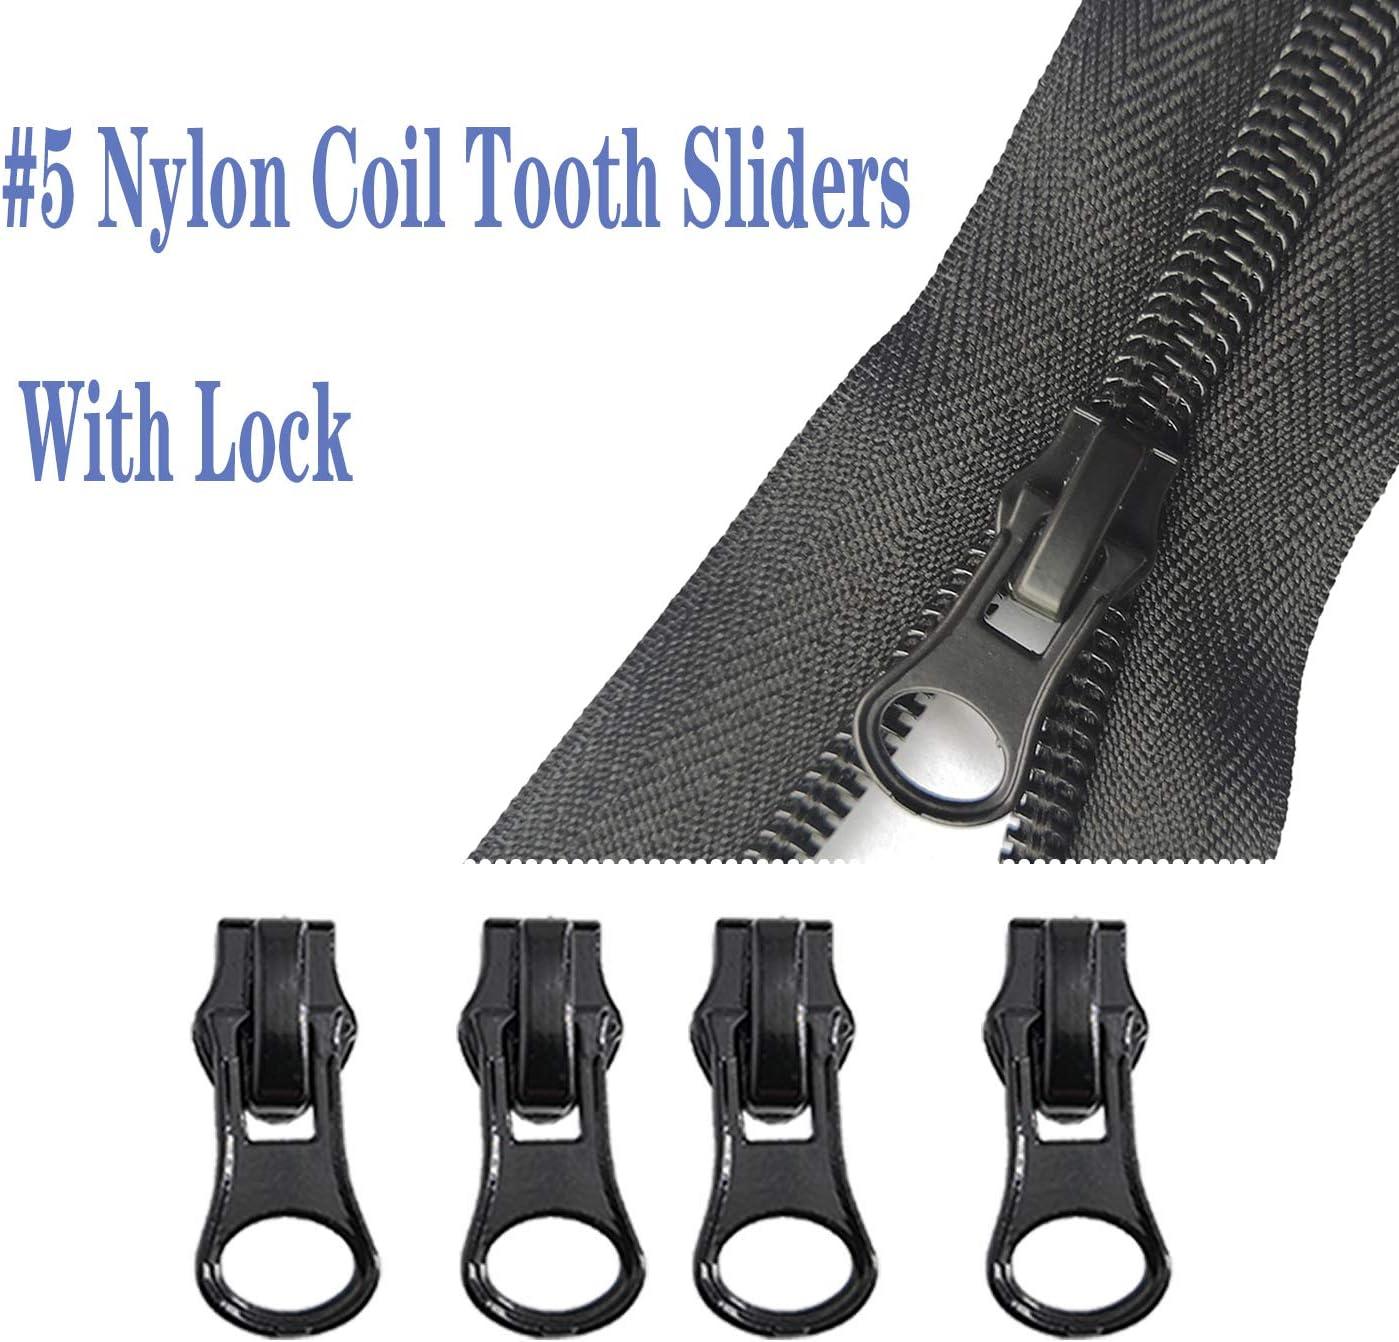  Zipper Repair Kit #5 Sliders with Pull 12 Pcs, Zipper Stops,  Replacement Zipper Head Bottom Stop and Top Stop, Metal Plastic and Nylon  Coil Zippers,Fix Zipper On for Repairing Coats,Jackets,Crafts.